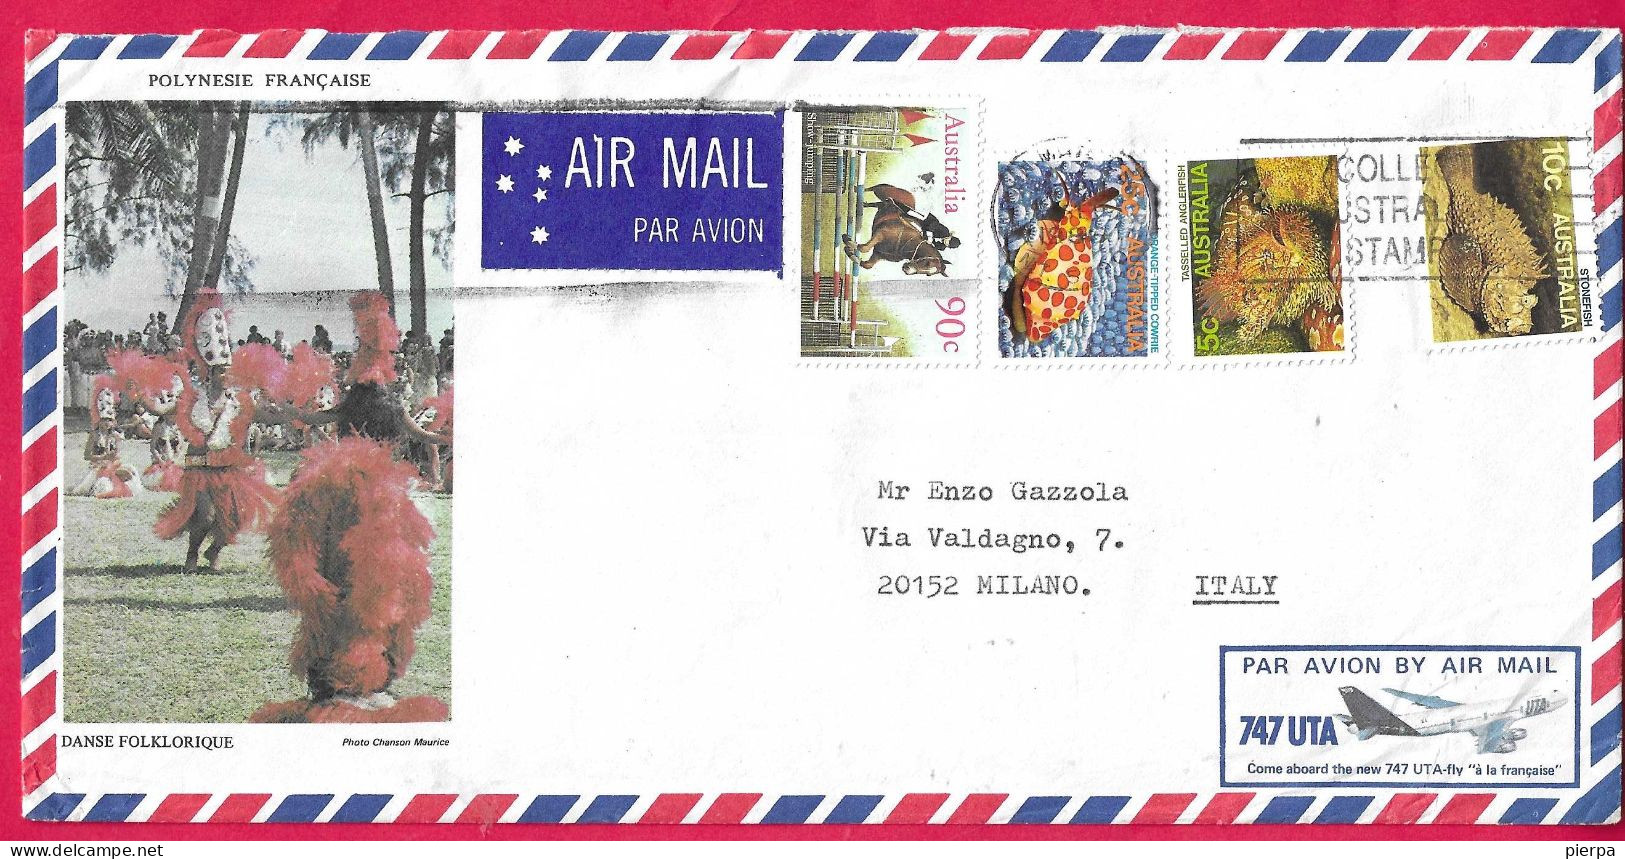 AUSTRALIA - TRADE ILLUSTRATED ENVELOPE BY AIR MAIL 747 UTA - Lettres & Documents